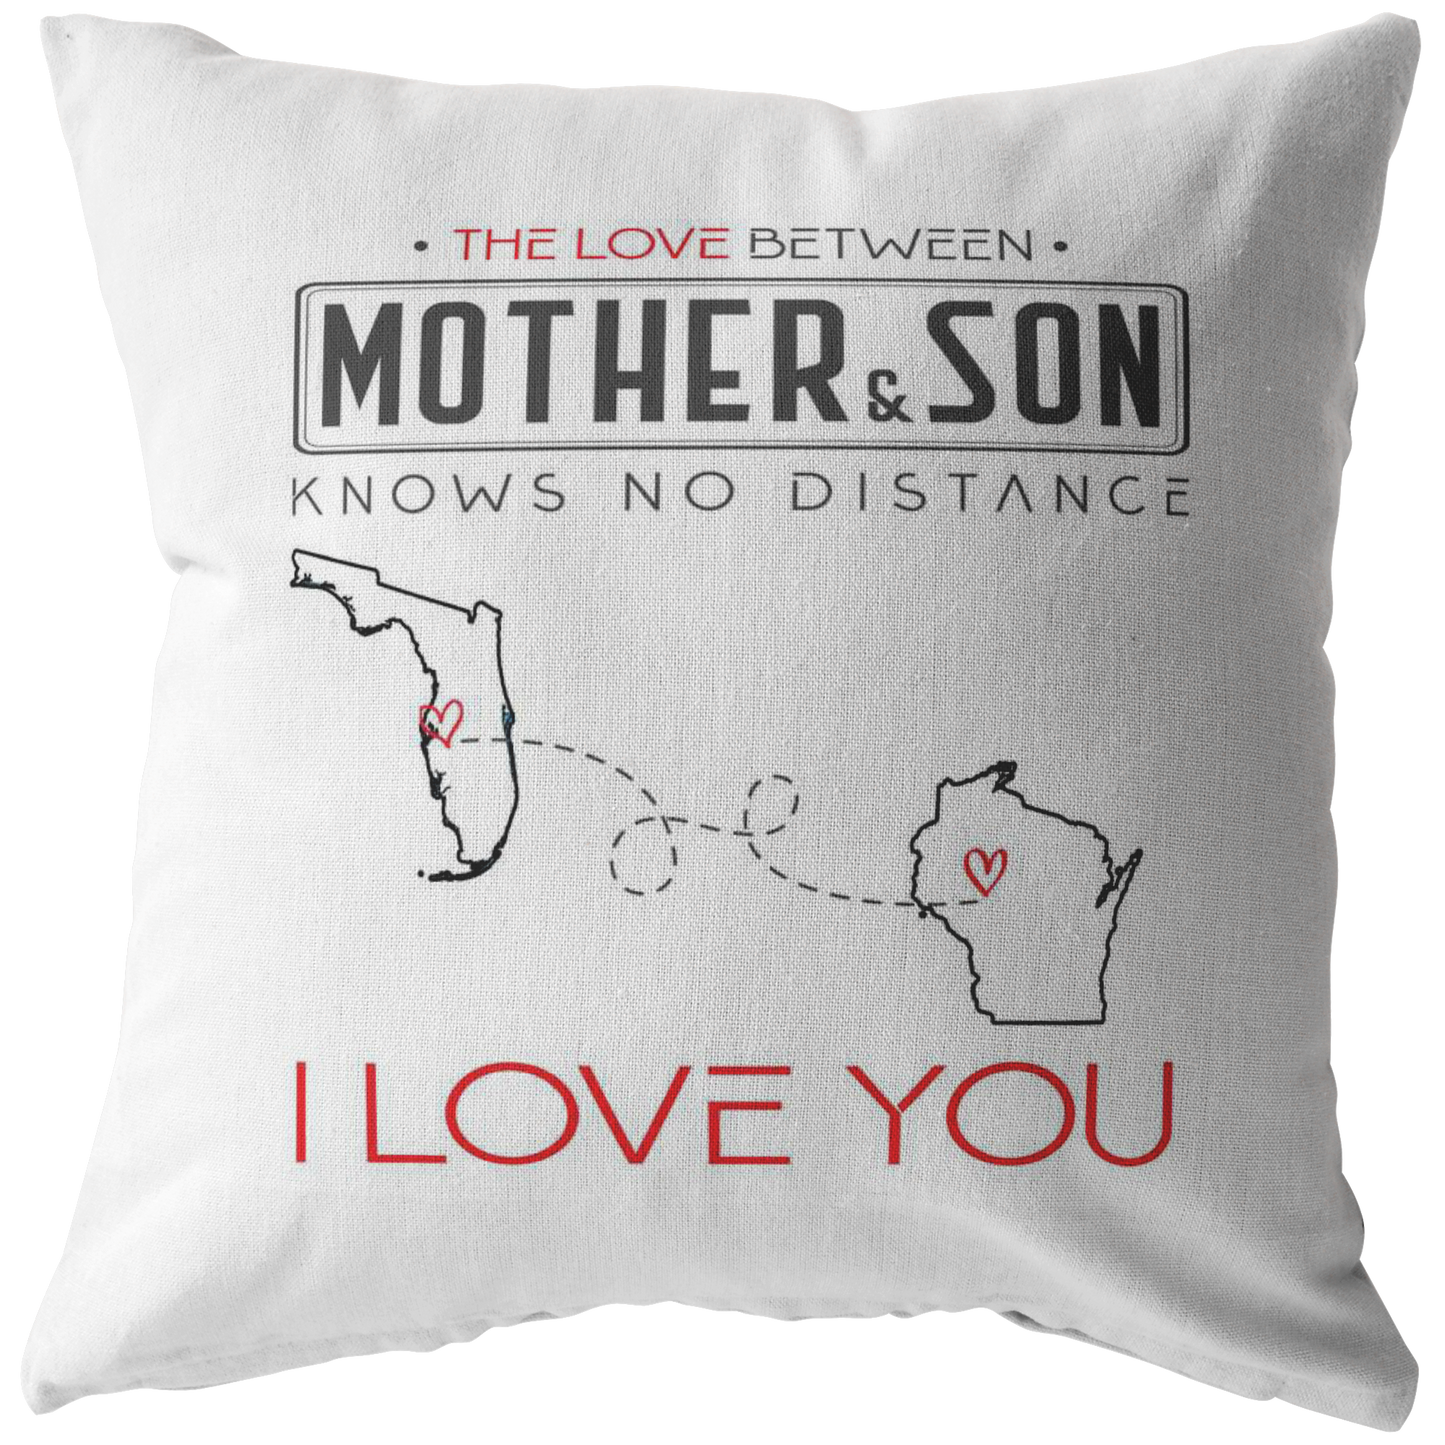 ND-pl20419721-sp-23452 - Mothers Day Gifts From Son - The Love Between Mother  Son